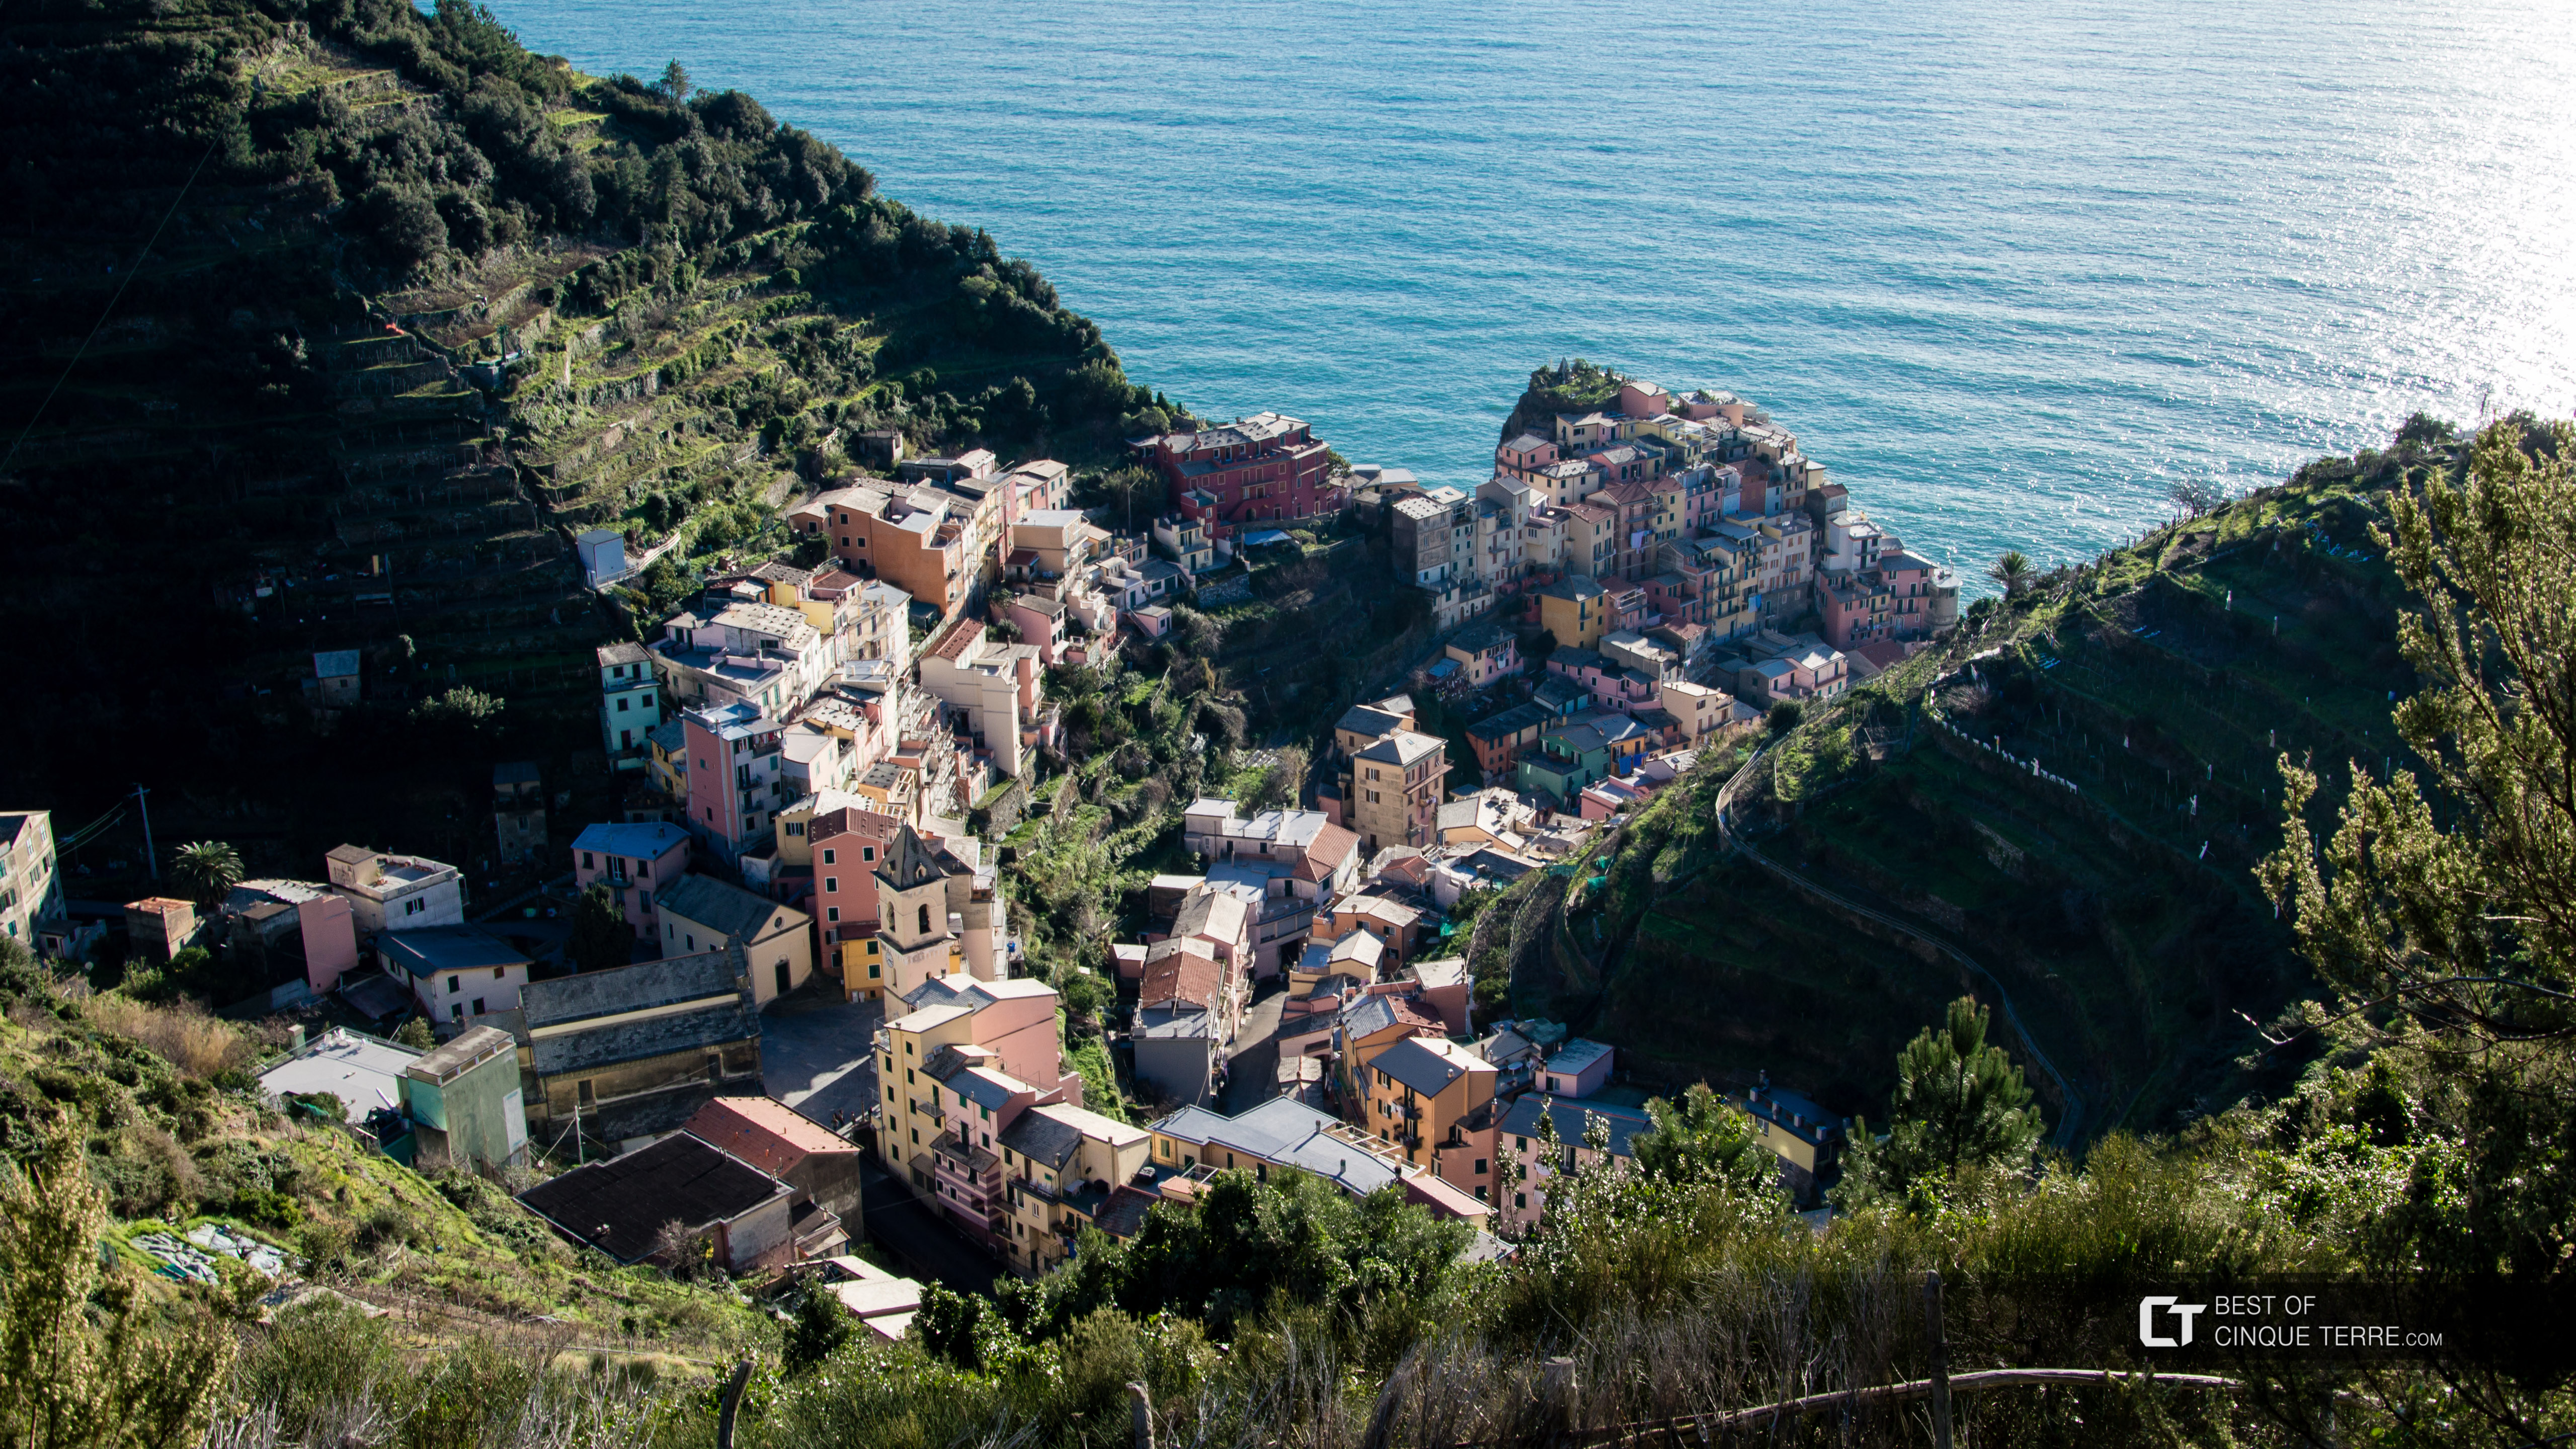 View of the village from the panoramic trail to Volastra, Manarola, Cinque Terre, Italy